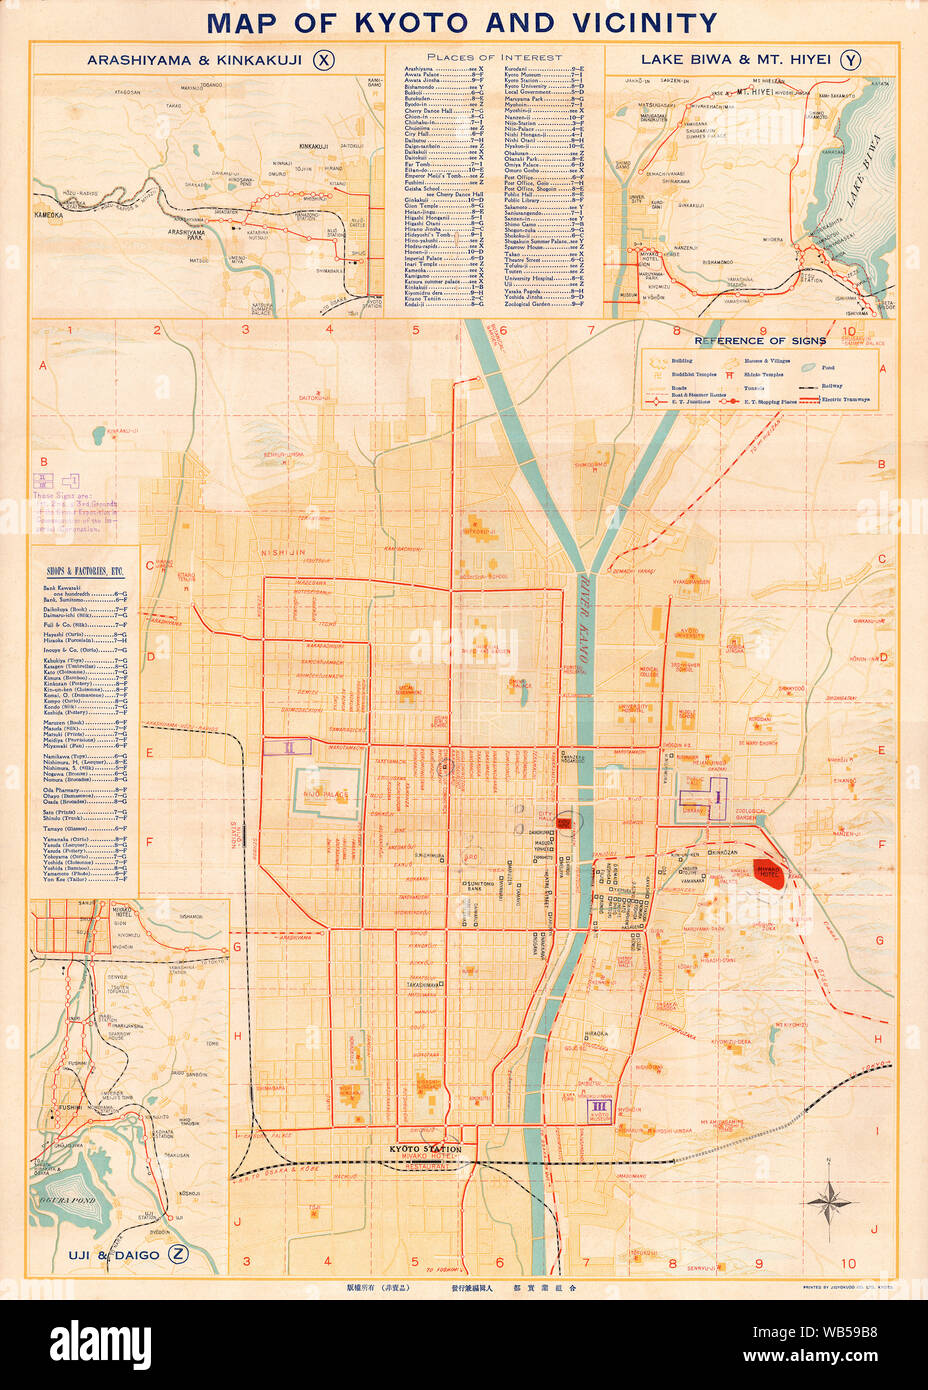 [ 1920s Japan - Map of Kyoto, 1928 ] —   'Map of Kyoto and Vicinity with Shopping Directory.' English language map, published by the Miyako Hotel. Features references for shops, factories and tourist sites. Inset maps for Arashiyama, Lake Biwa, Mt. Hiei, Uji and Daigo. The map is not dated but contains markings for the 'Grand Exposition in Commemoration of the Imperial Coronation,' which dates it to 1928 (Showa 3) when an exhibition for the coronation of Emperor Showa (Hirohito) took place.  20th century vintage map. Stock Photo